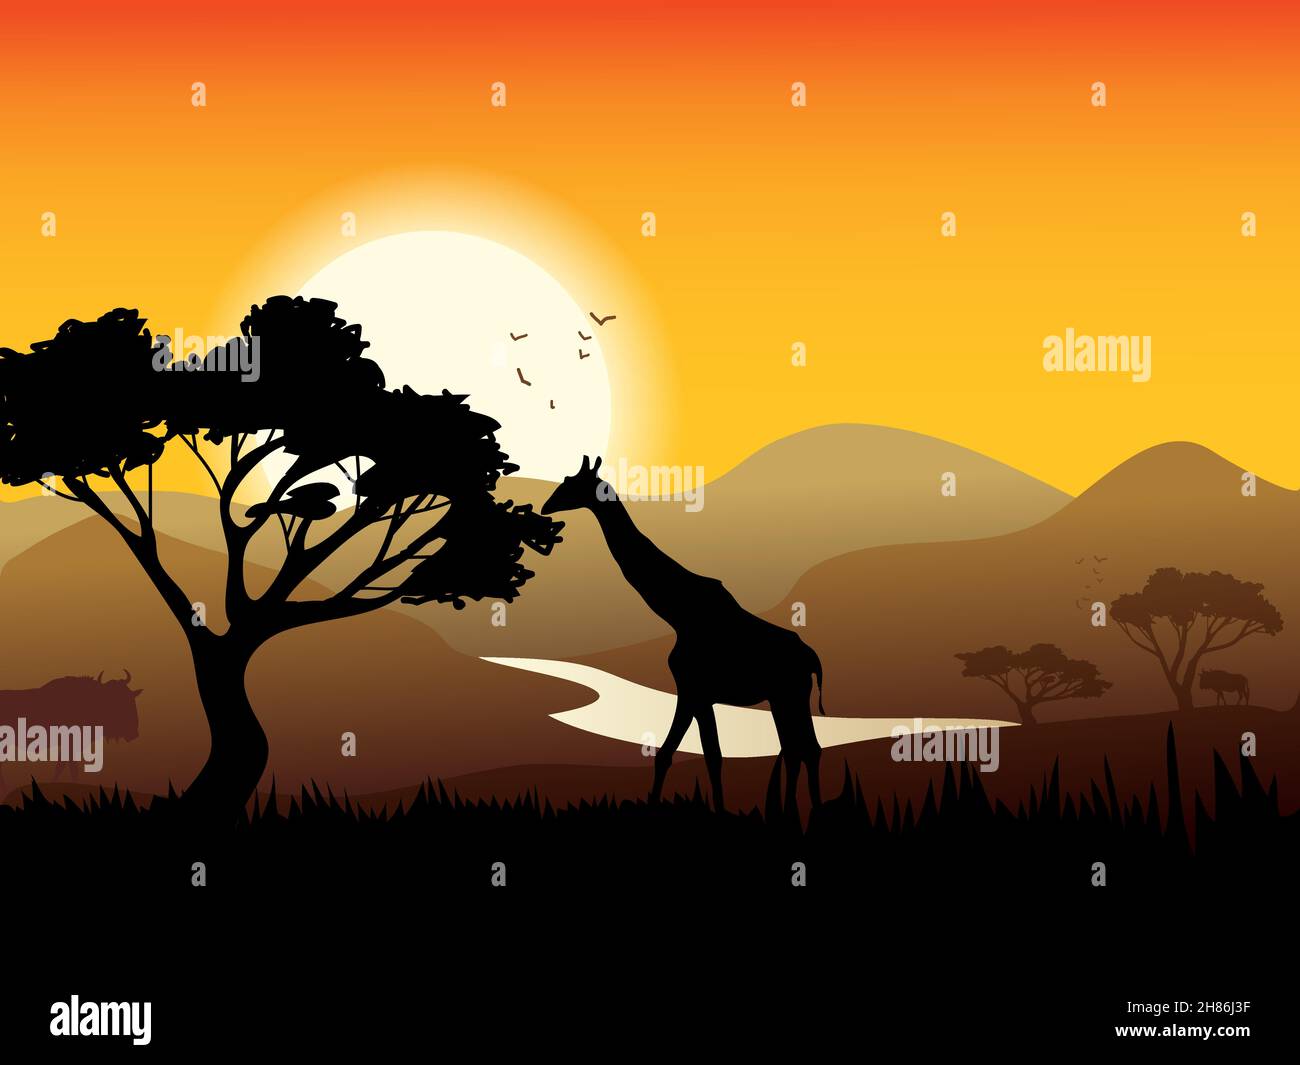 African landscape poster with acacia tree giraffe and sunset on background vector illustration Stock Vector